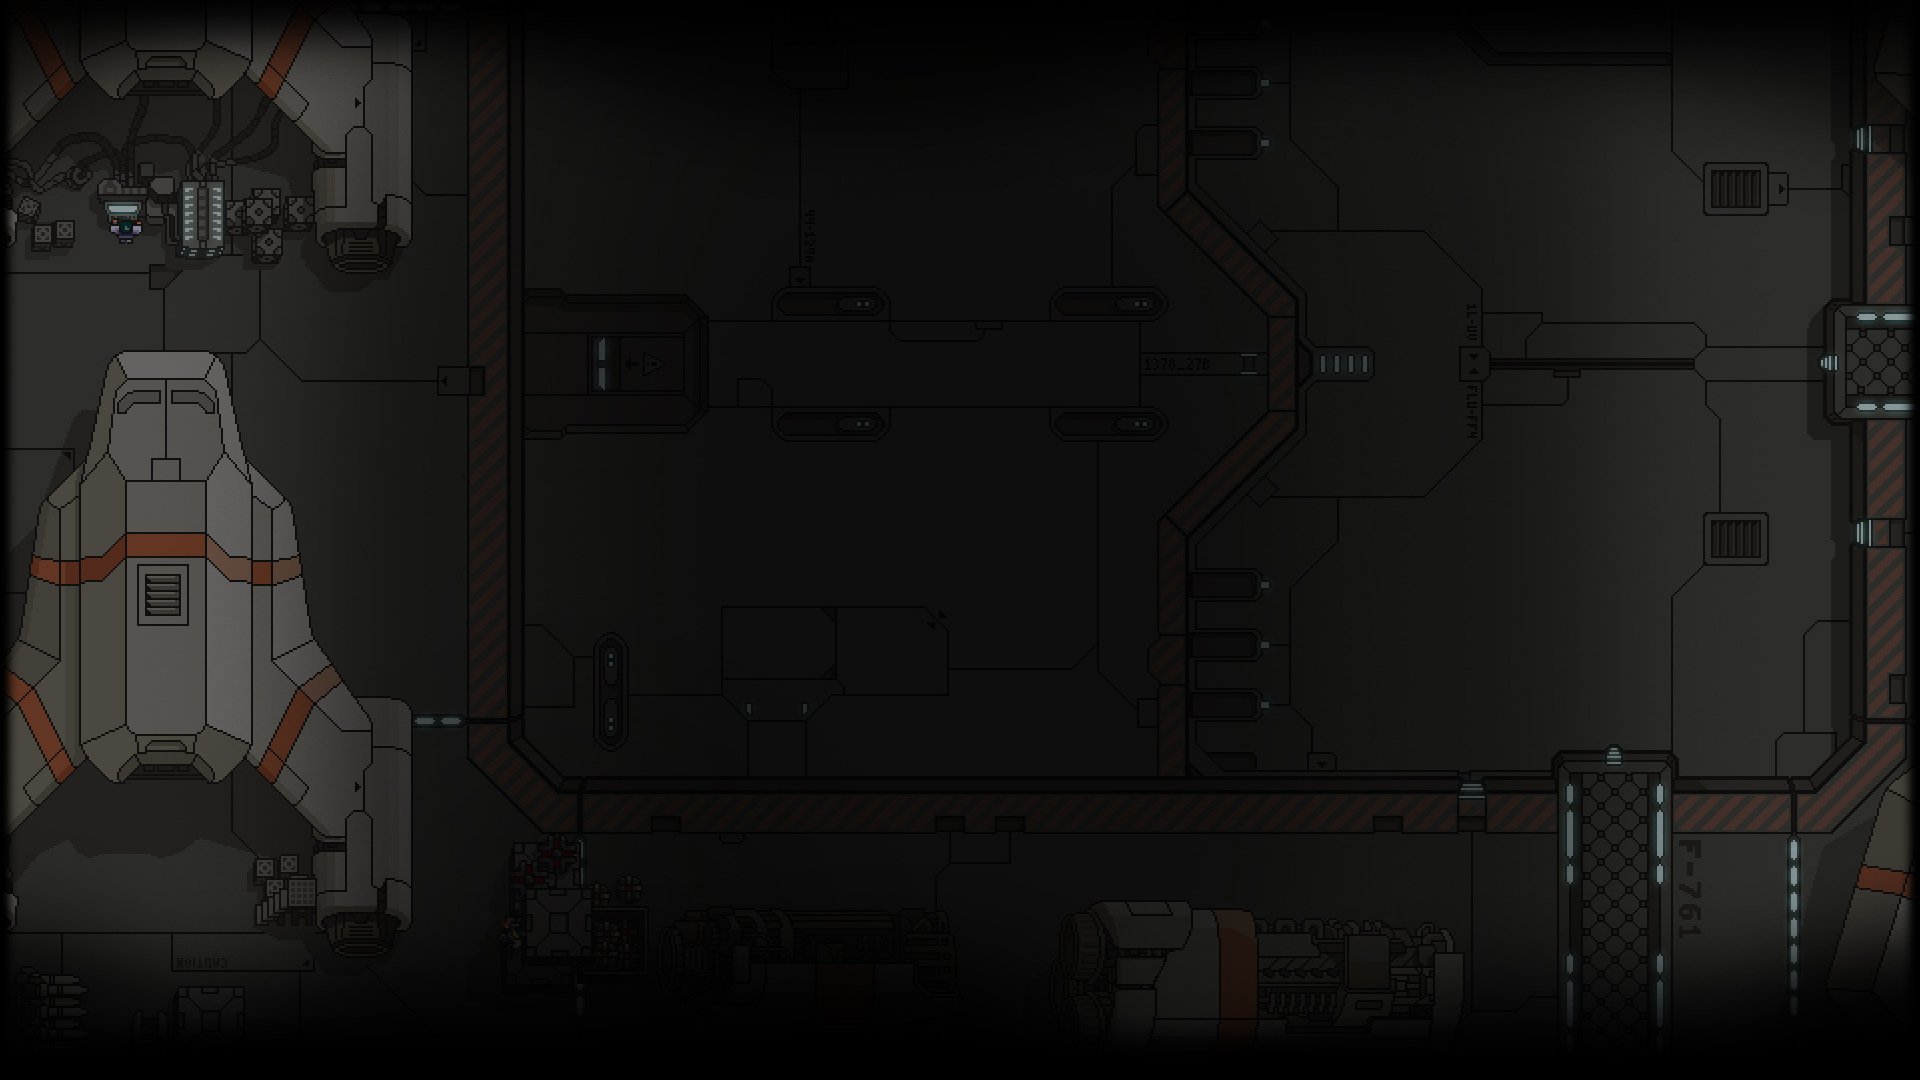 Ftl Faster Than Light HD Wallpaper Background Image